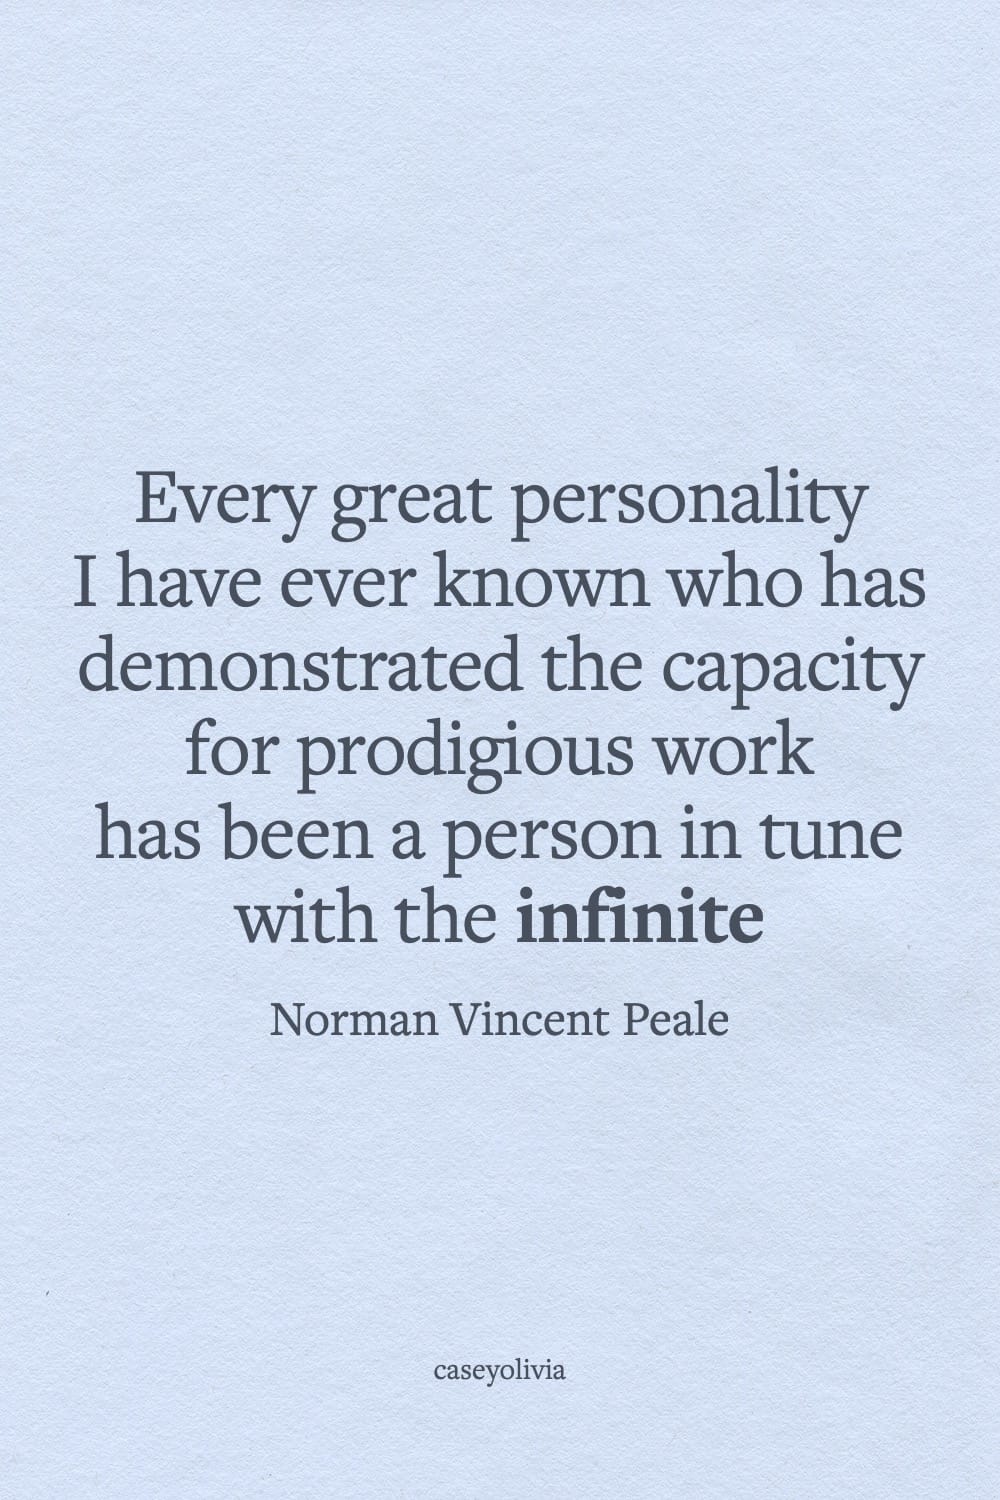 norman vincent peale one in tune with the infinite quote